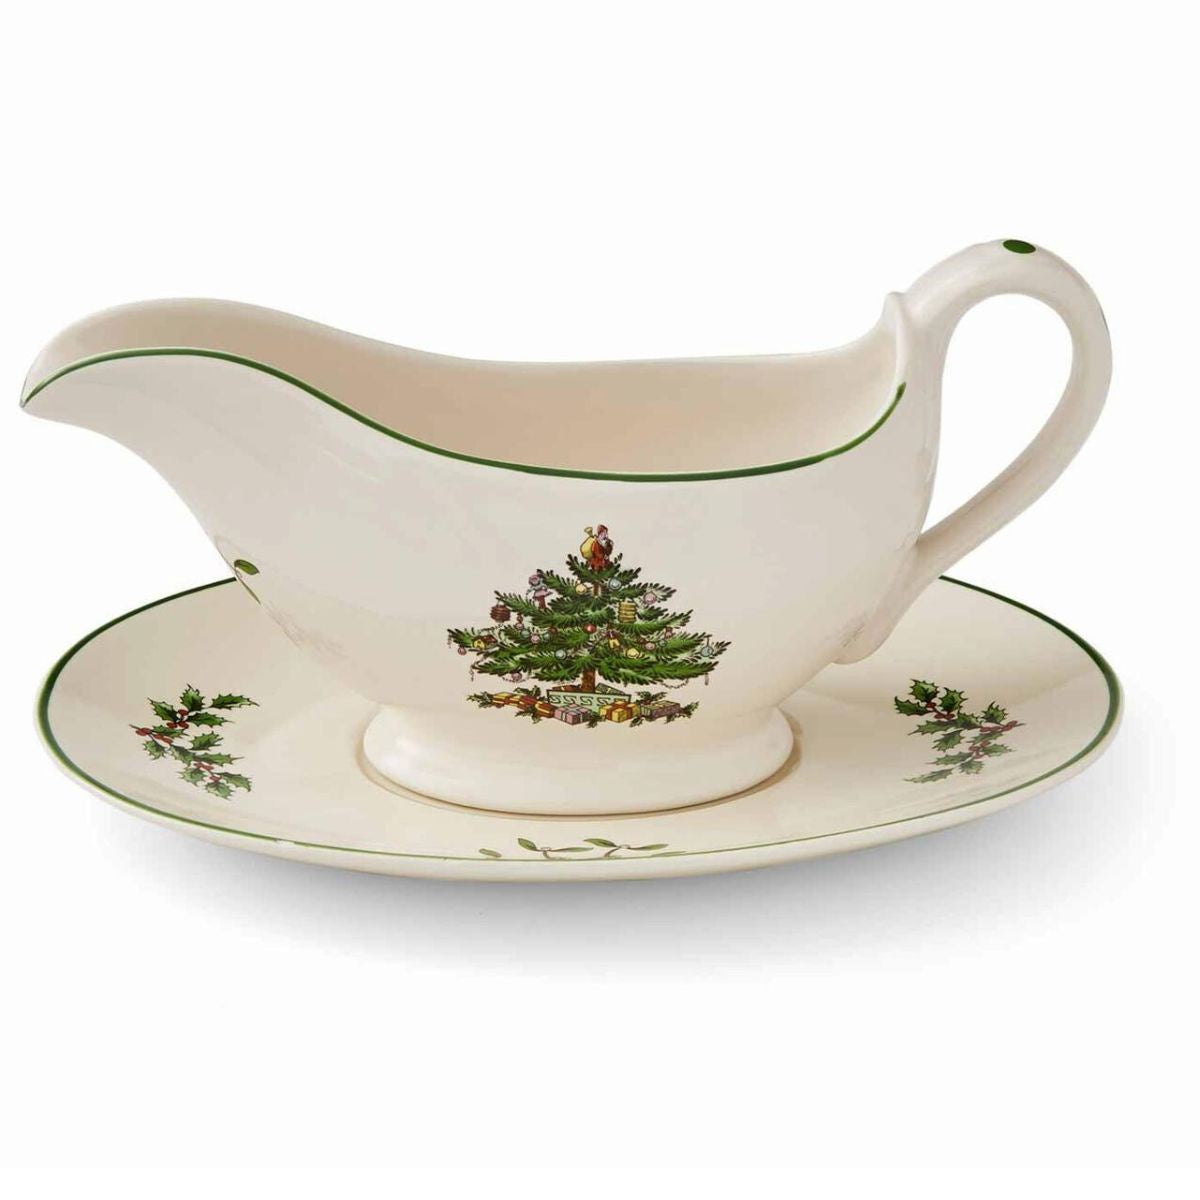 Spode Gravy Sauce Boat with Stand